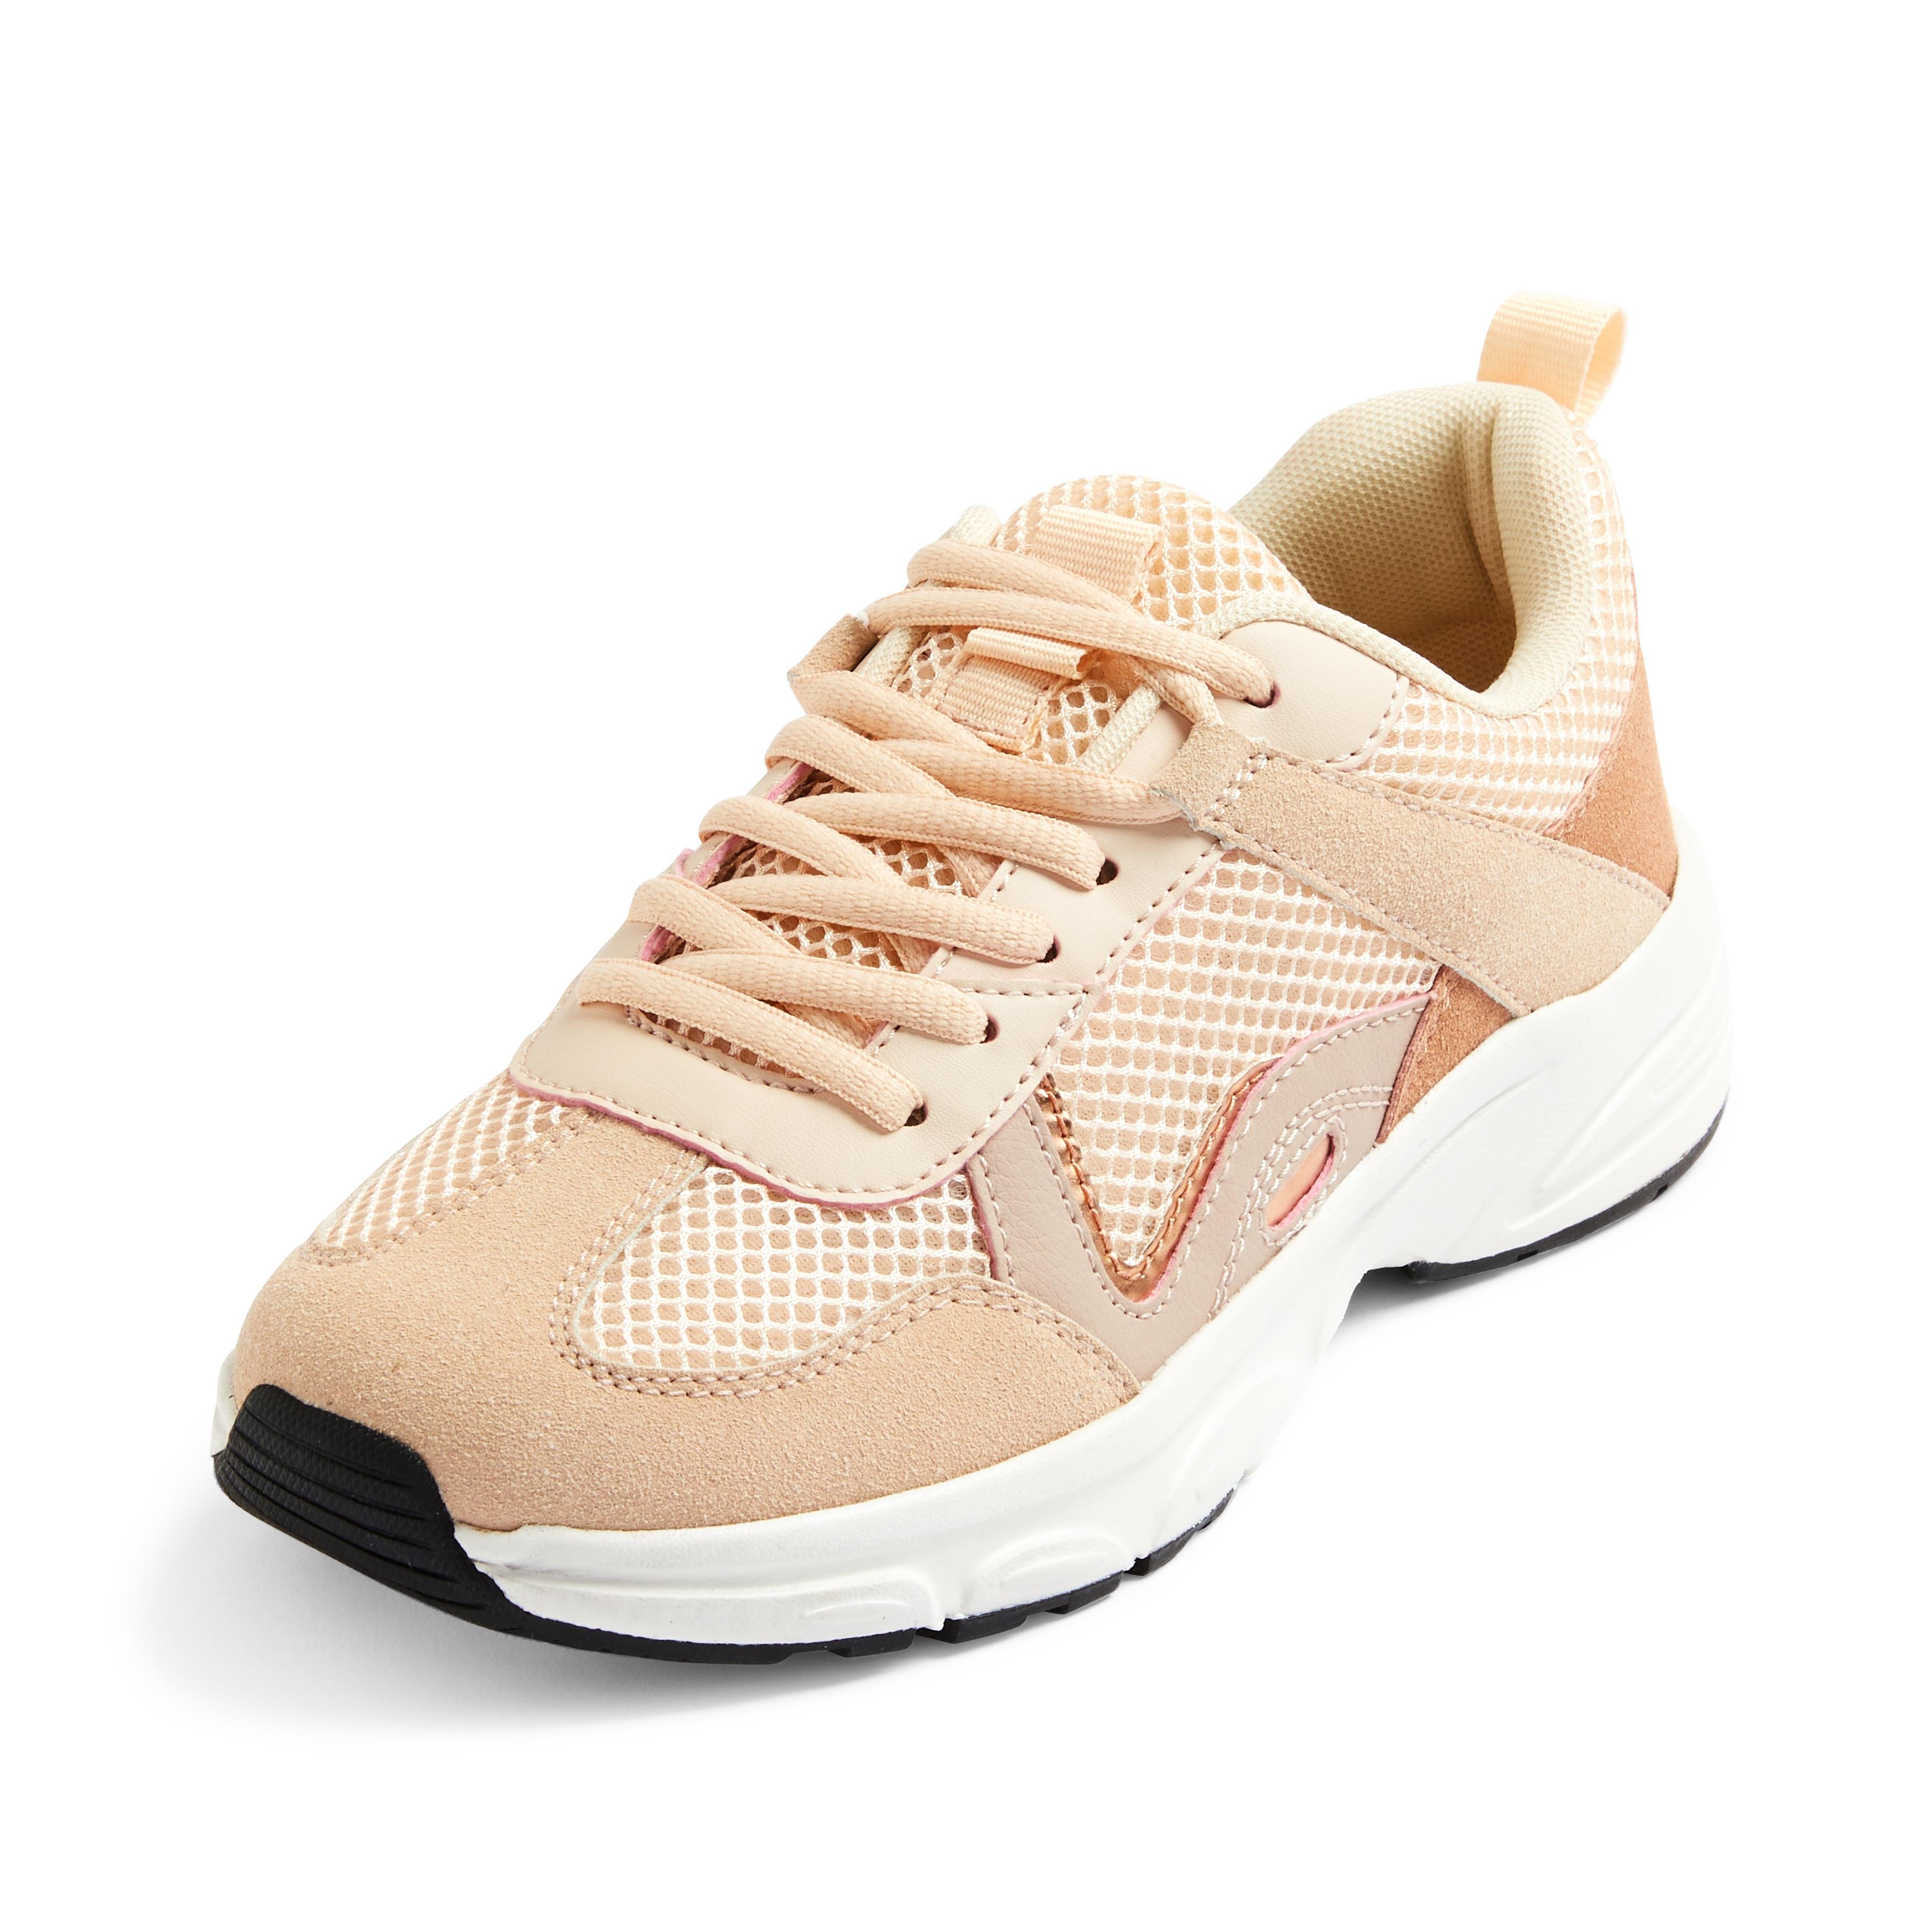 Beige Mesh Wide Chunky Trainers | Women's Trainers | Women's Shoes ...